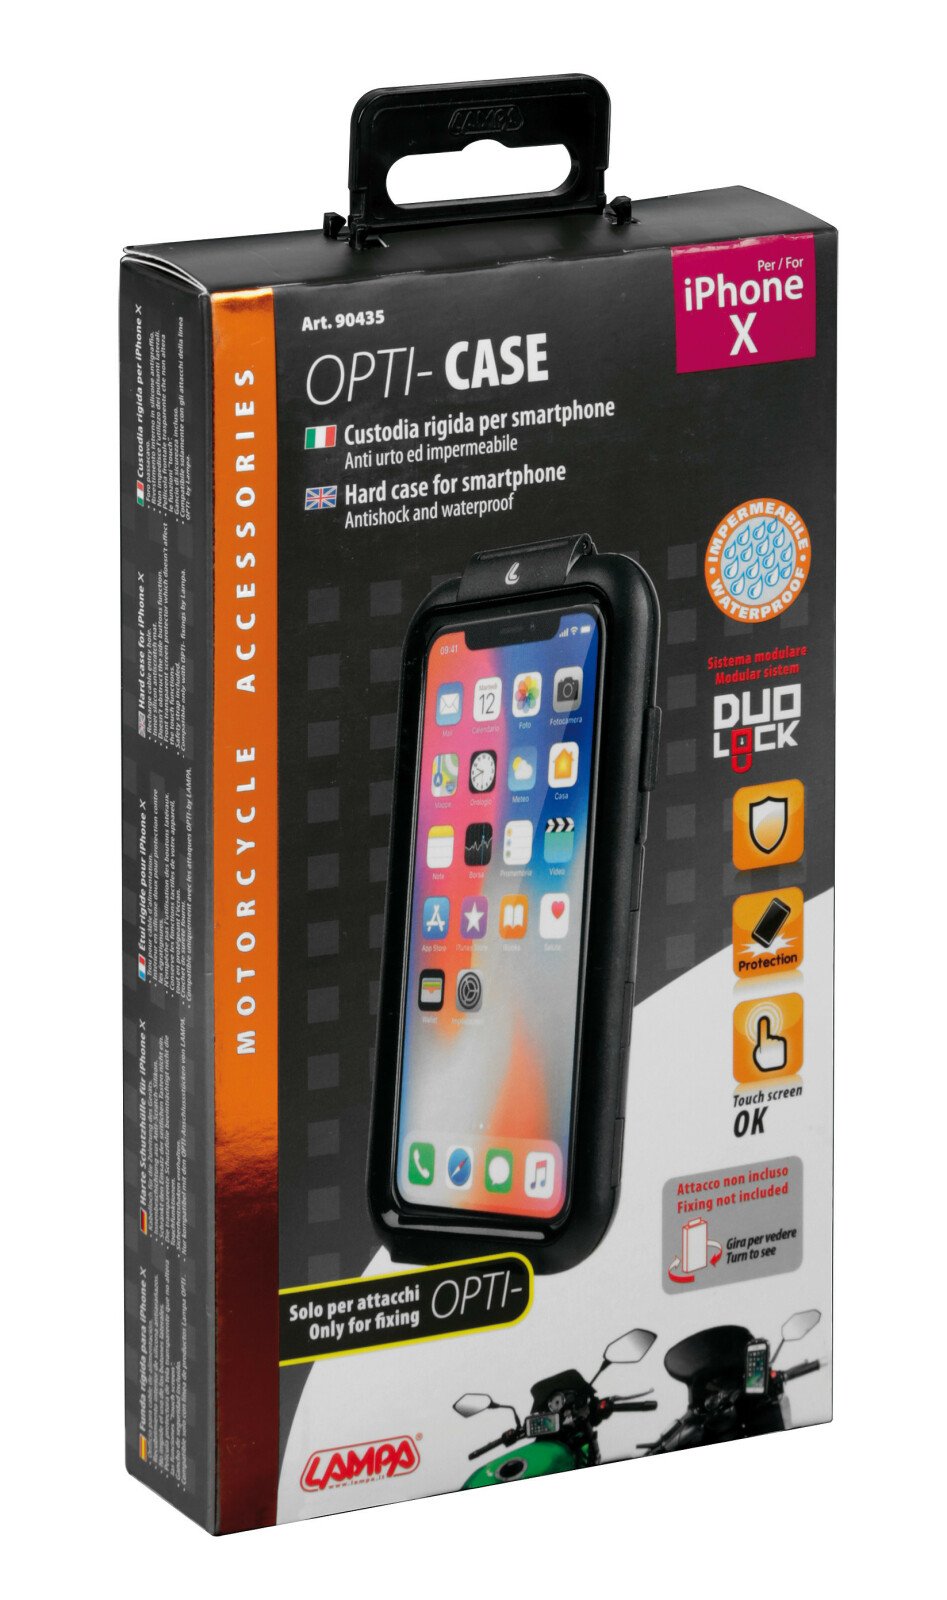 Opti Case, hard case for smartphone - iPhone X/Xs thumb